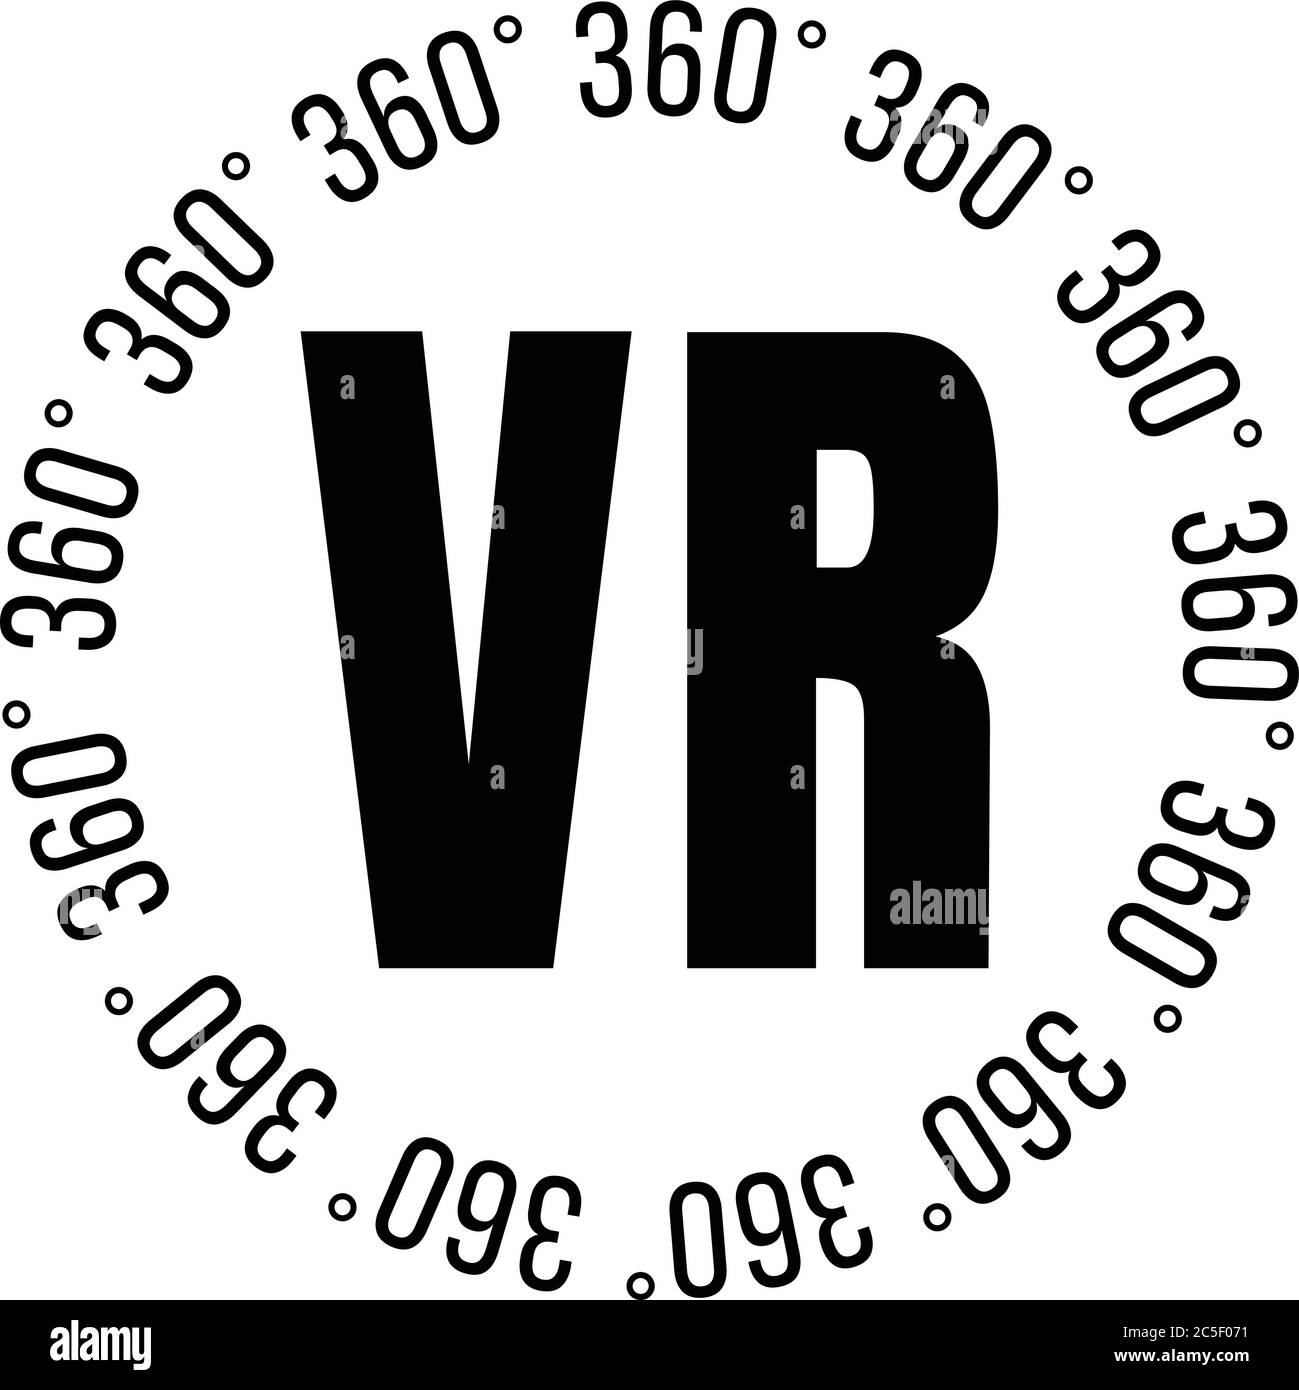 Virtual Reality 360 Degrees VR Icon Text illustration Stock Vector